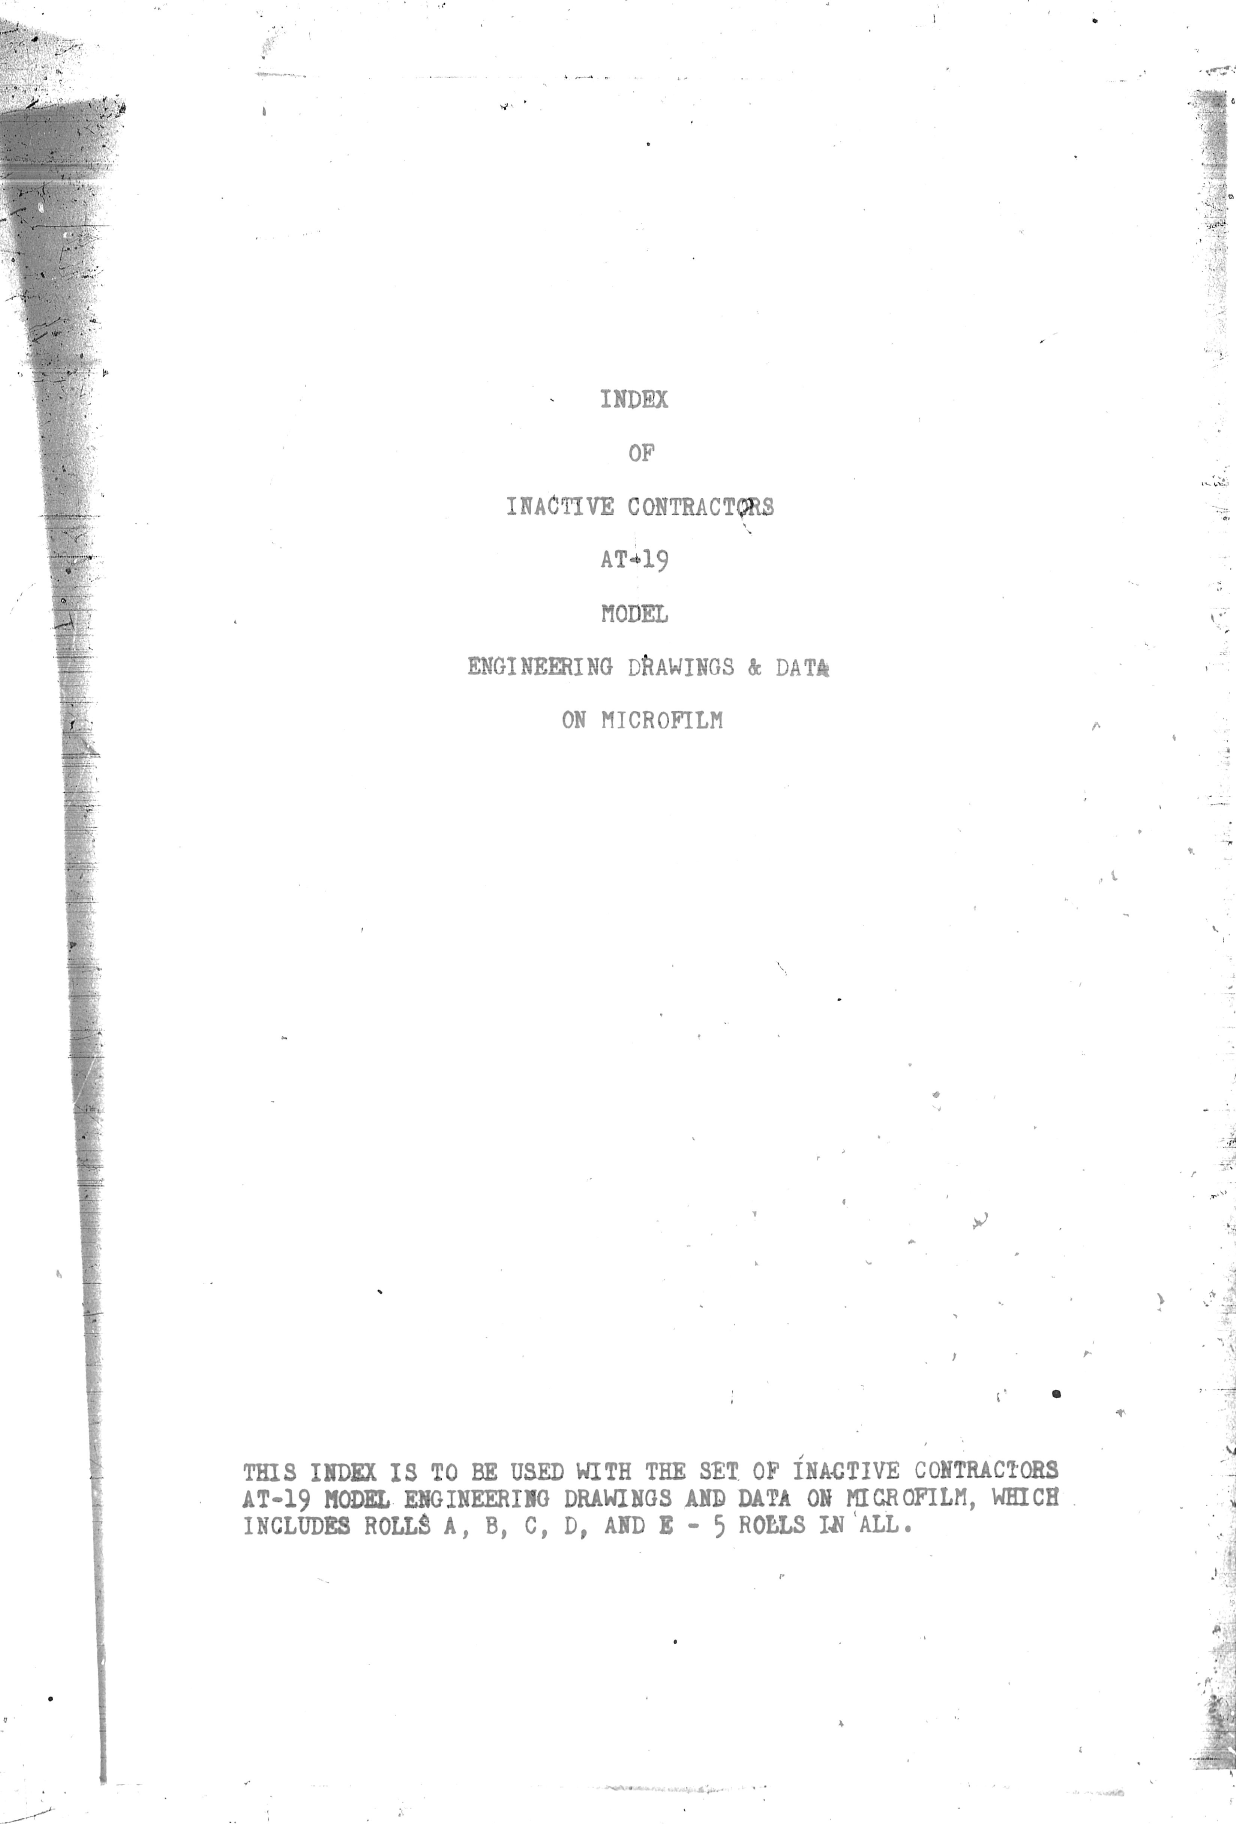 Sample page 1 from AirCorps Library document: Index of Inactive Contractors and Engineering Drawings and Data for AT-19